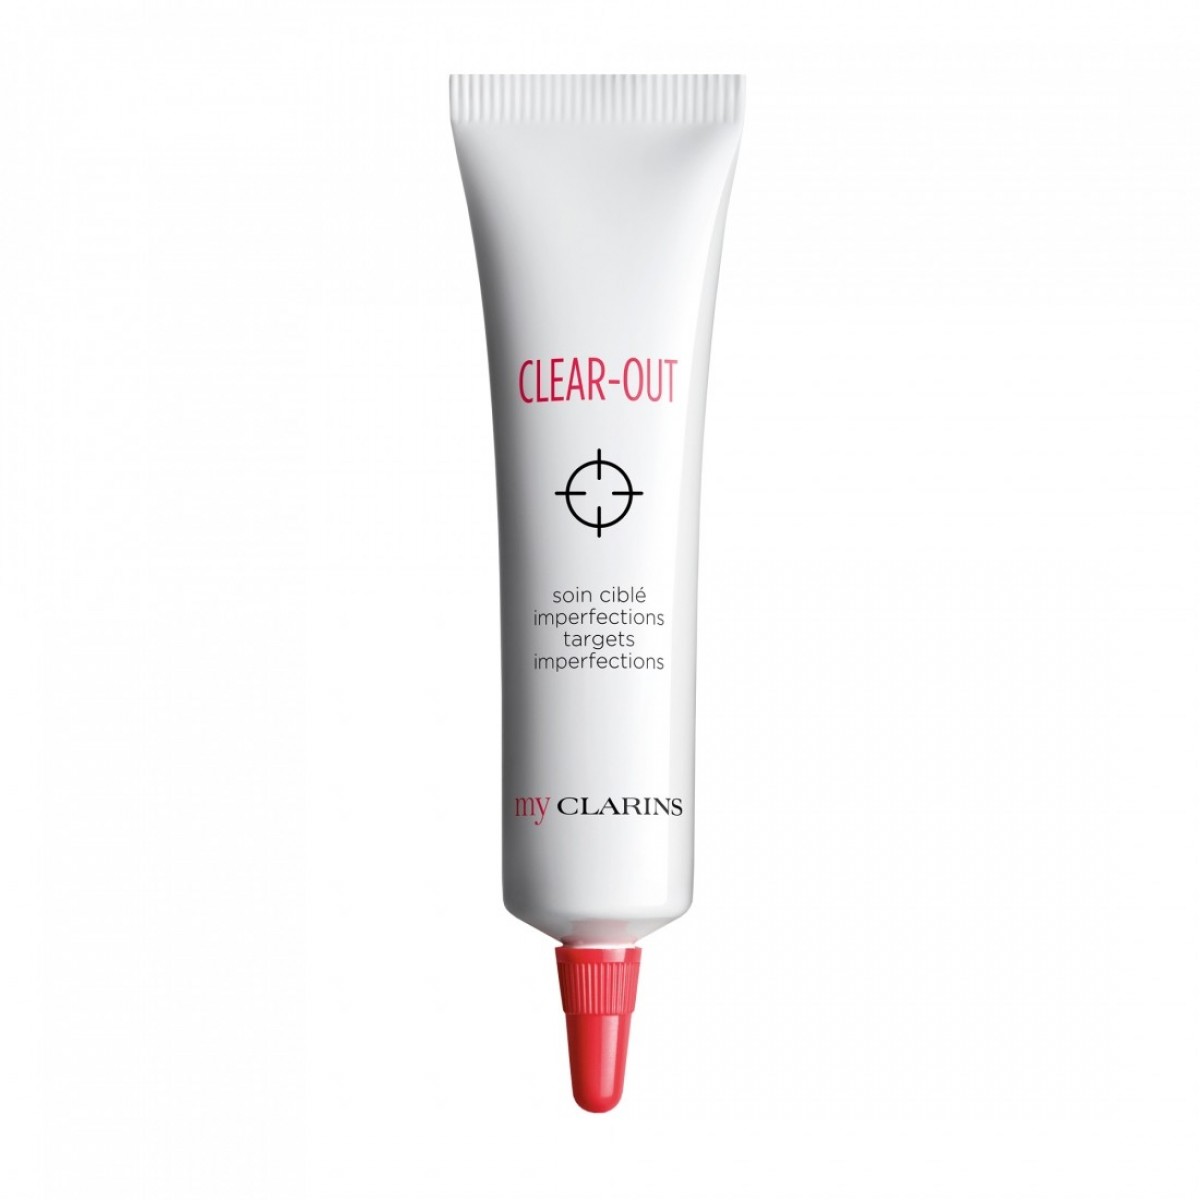 myClarins Clear-Out Blemish Targeting Cream